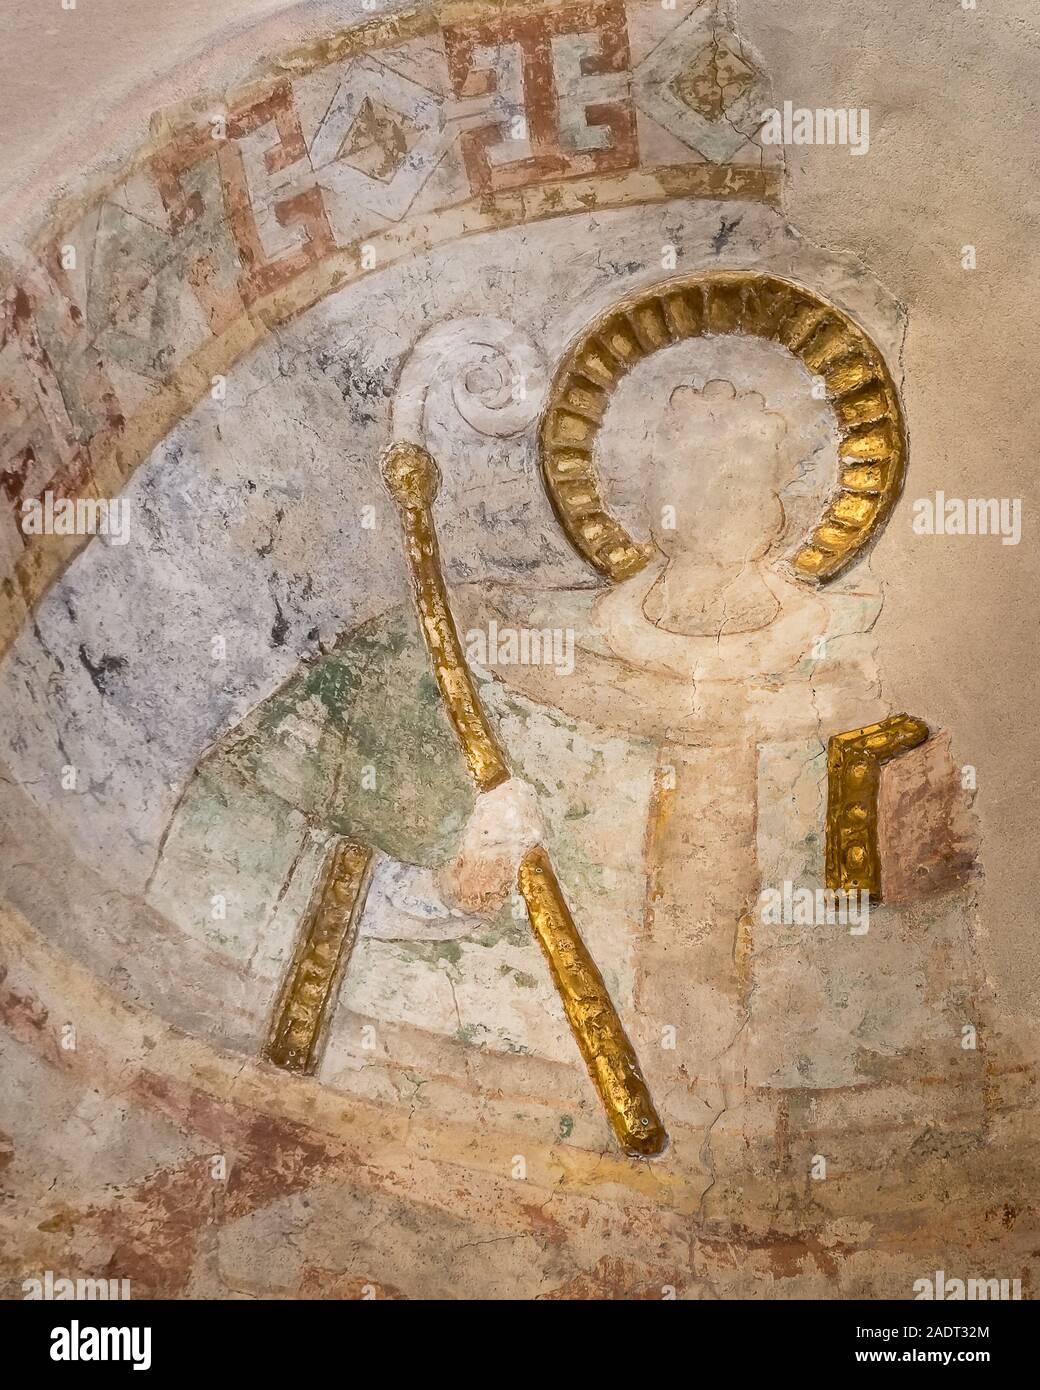 Ancient romanesque painting af a bishof with his crook, Malov, Denmark, January 23, 2018 Stock Photo